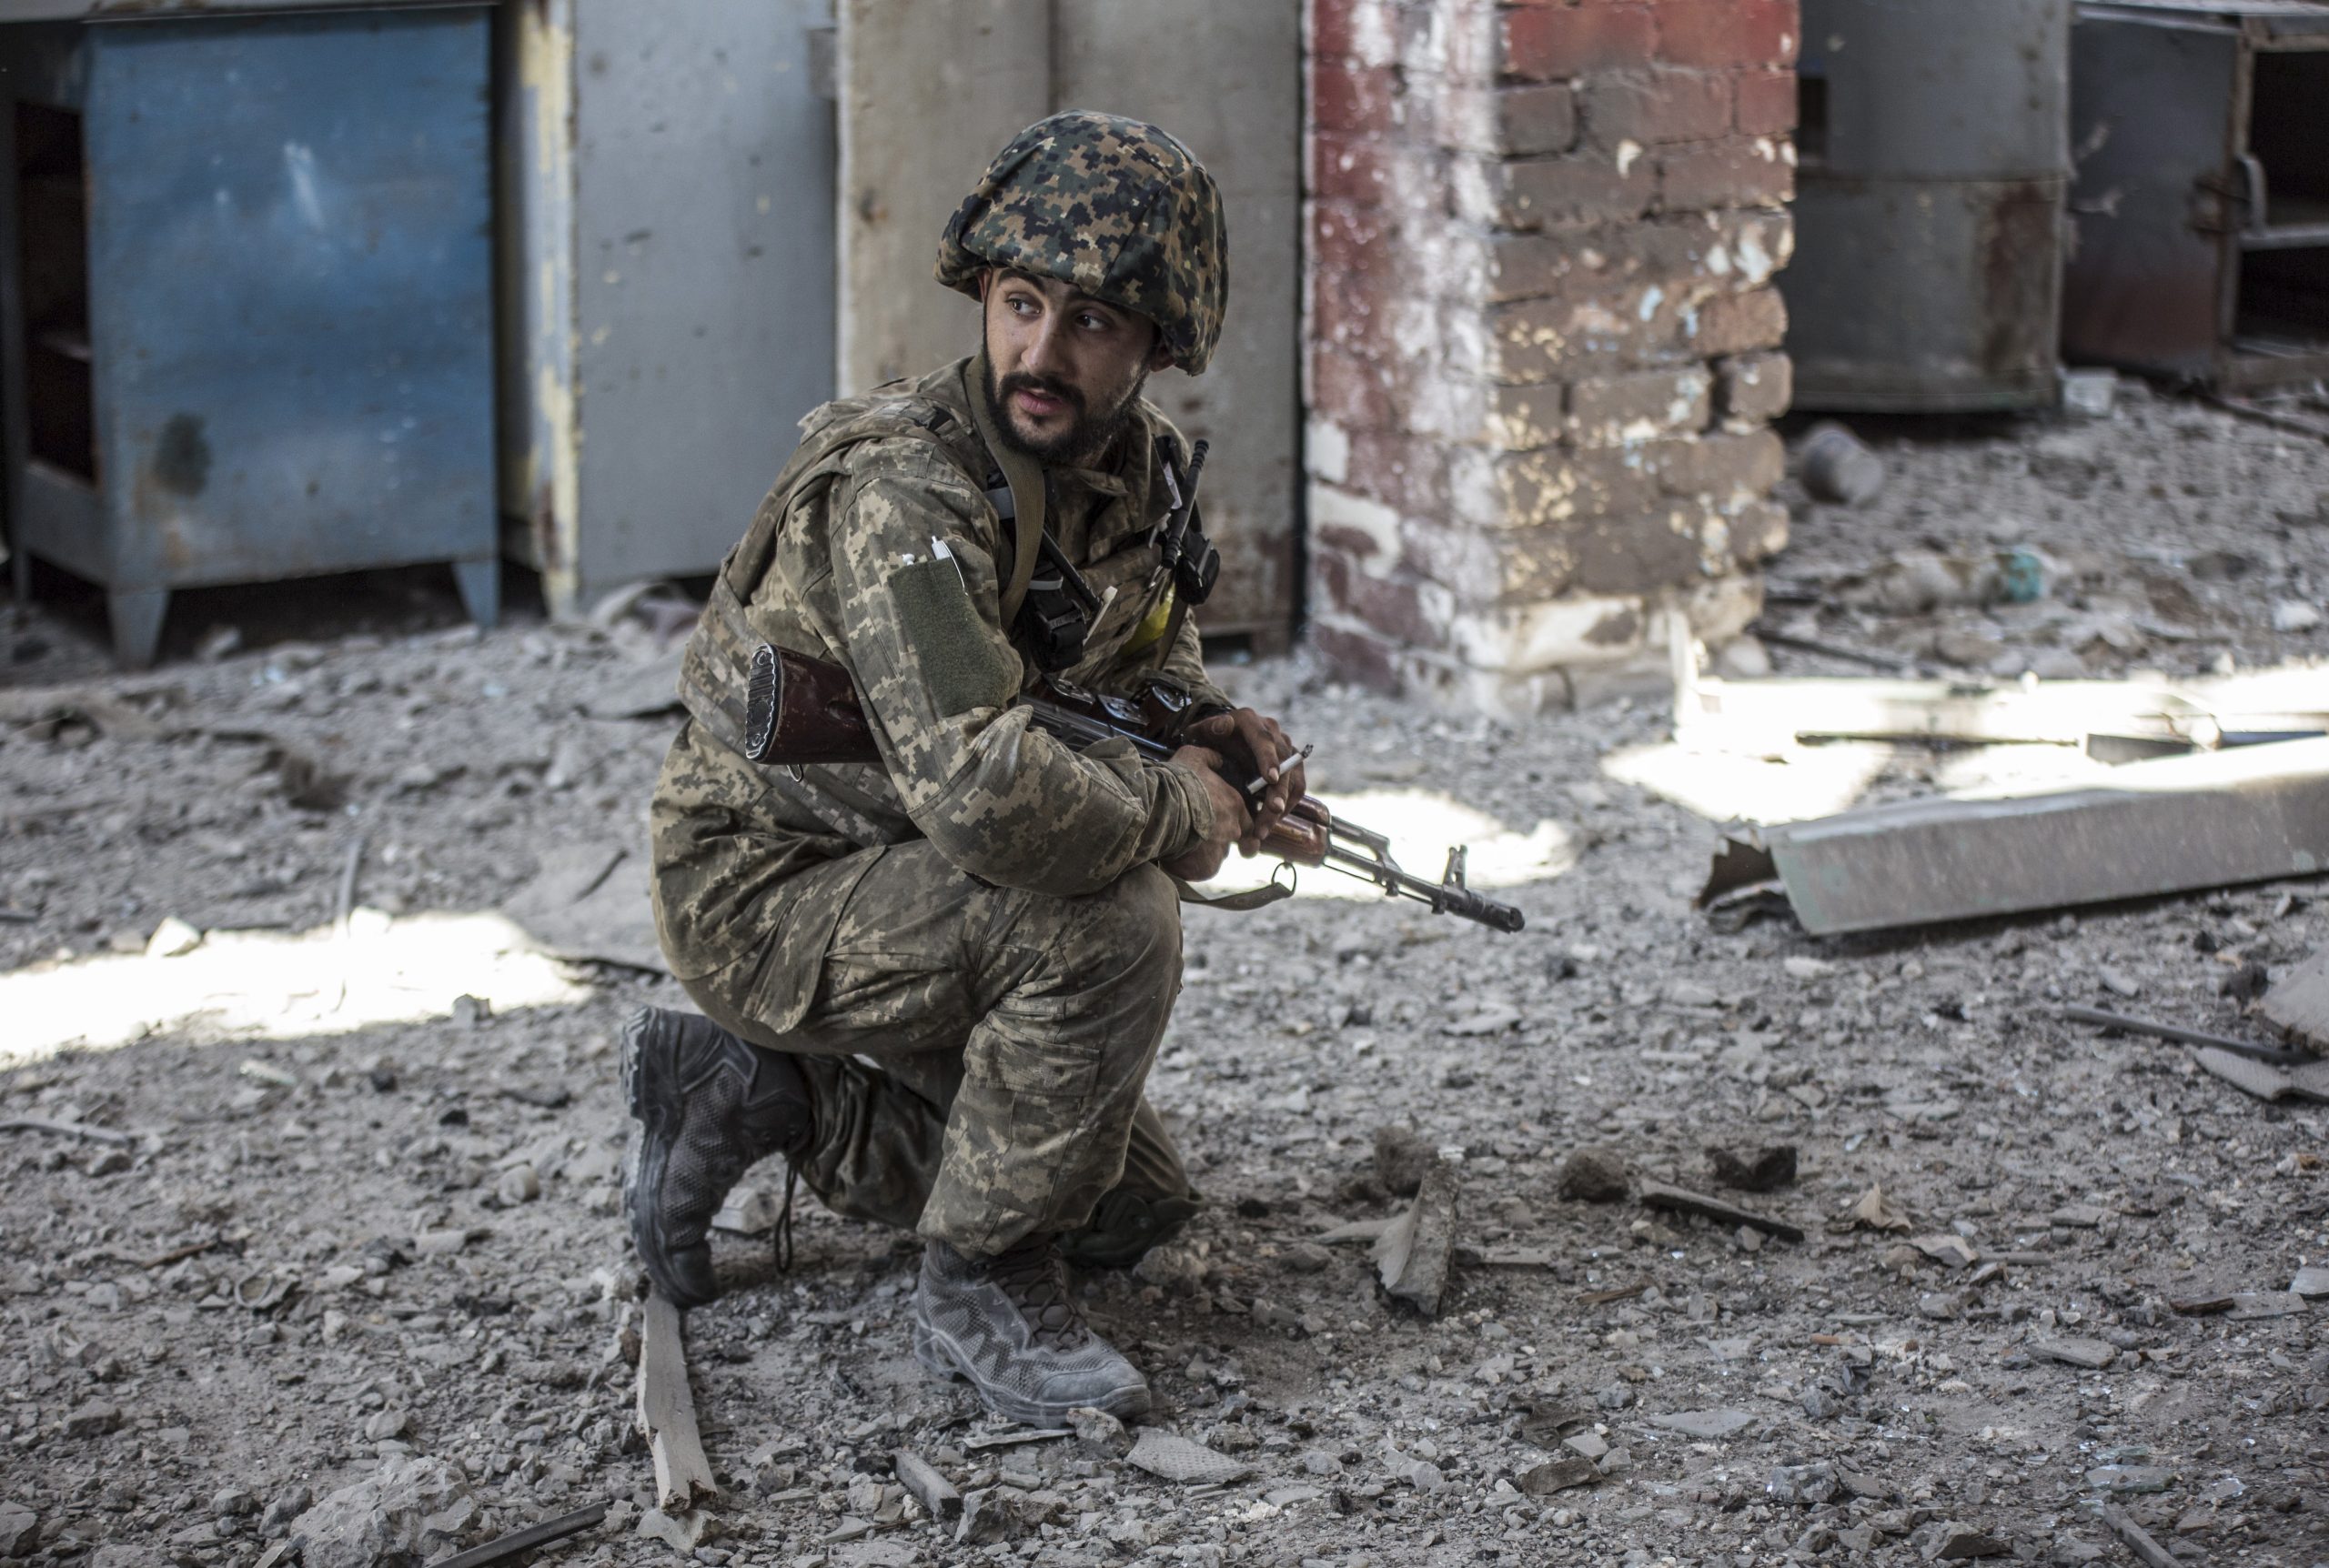 epa10026519 A Ukrainian serviceman smokes on a position in the city of Severodonetsk of Luhansk area, Ukraine 19 June 2022 (issued 21 June 2022). The city of Severodonetsk and its surroundings witnessed heavy fighting for the last days. Ukrainian troops control a part of city include the Azot plant where 568 people, including 38 children, remain in the bomb shelters, the head of the Luhansk Regional State Administration Serhiy Haidai said on June 21. On 24 February Russian troops entered Ukrainian territory starting a conflict that has provoked destruction and a humanitarian crisis.  EPA/OLEKSANDR RATUSHNIAK